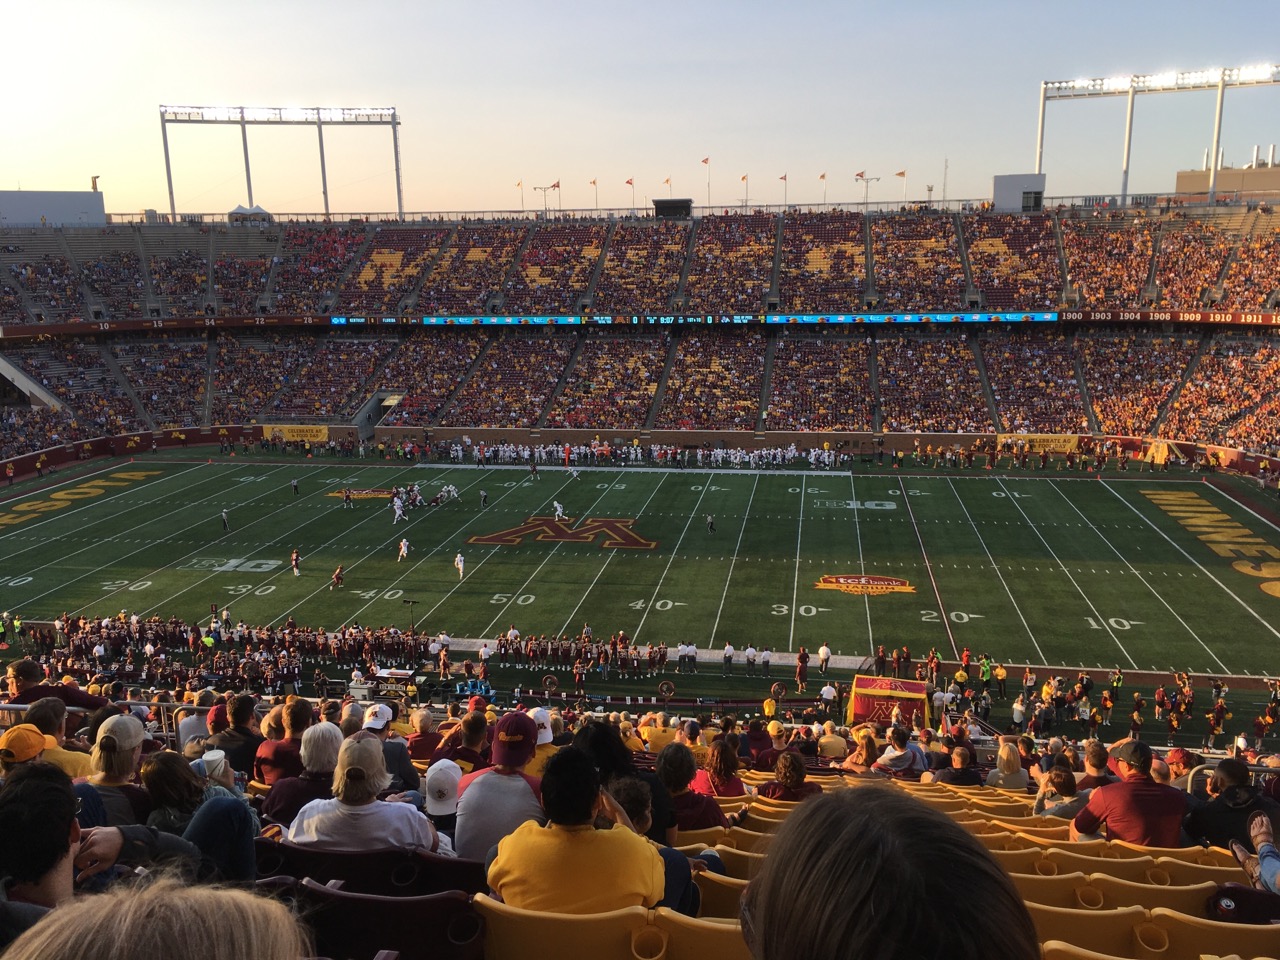 The Gopher Football field and spectators